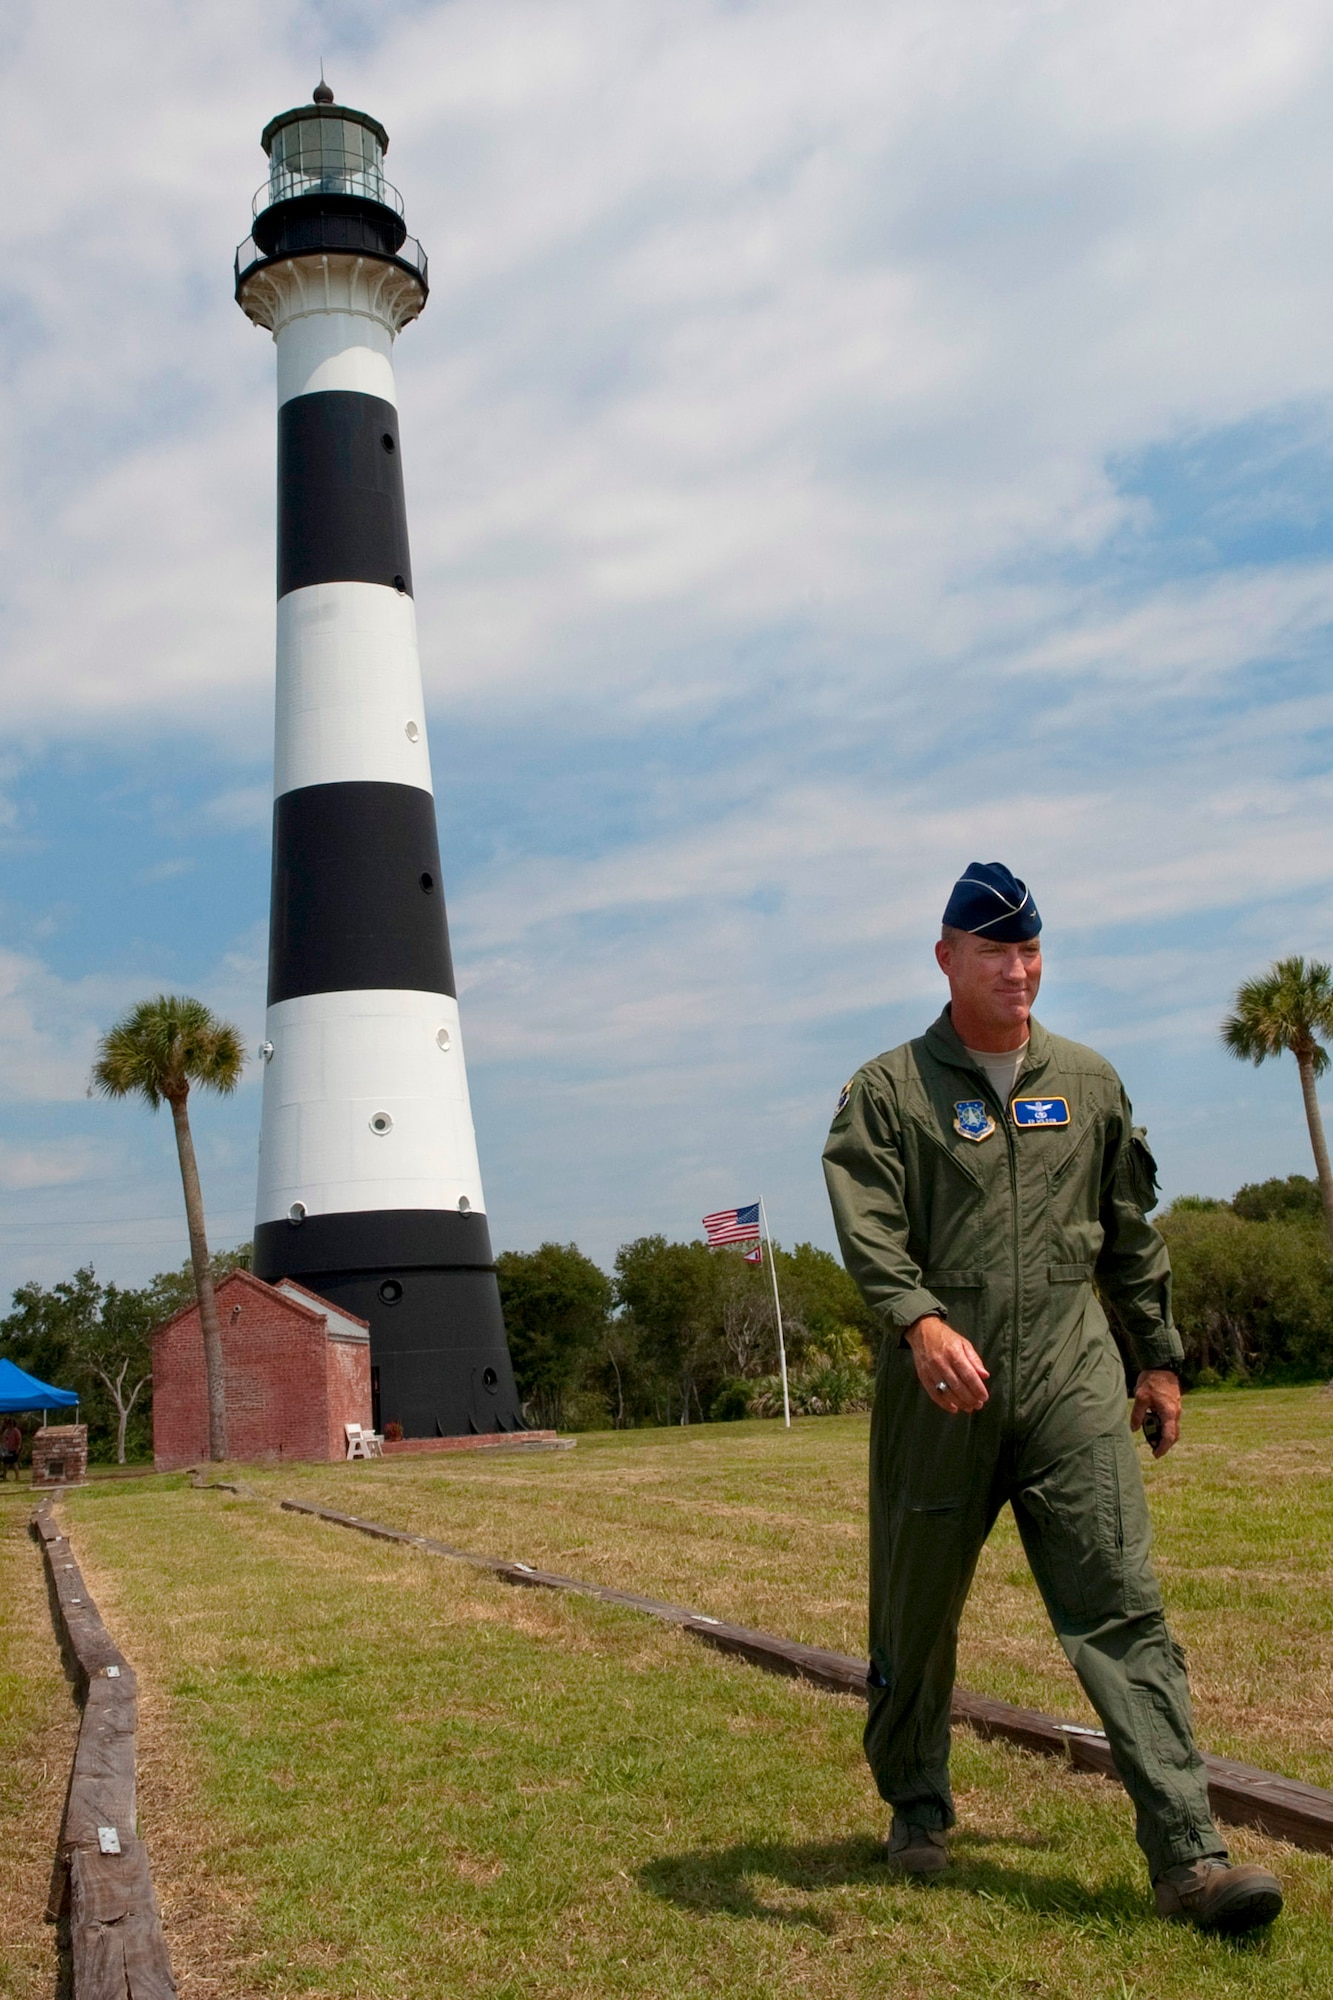 Brig. Gen. Ed Wilson, 45th Space Wing commander, credited with making tours of Cape Canaveral Air Force Station more accessible to the public, leaves the Cape Canaveral Lighthouse during a tour. The Cape Canaveral Lighthouse is the only fully operational lighthouse owned by the U.S. Air Force and is one of several stops on the tour, which also includes historical and operational space launch complexes. (Air Force photo/Matthew Jurgens)

